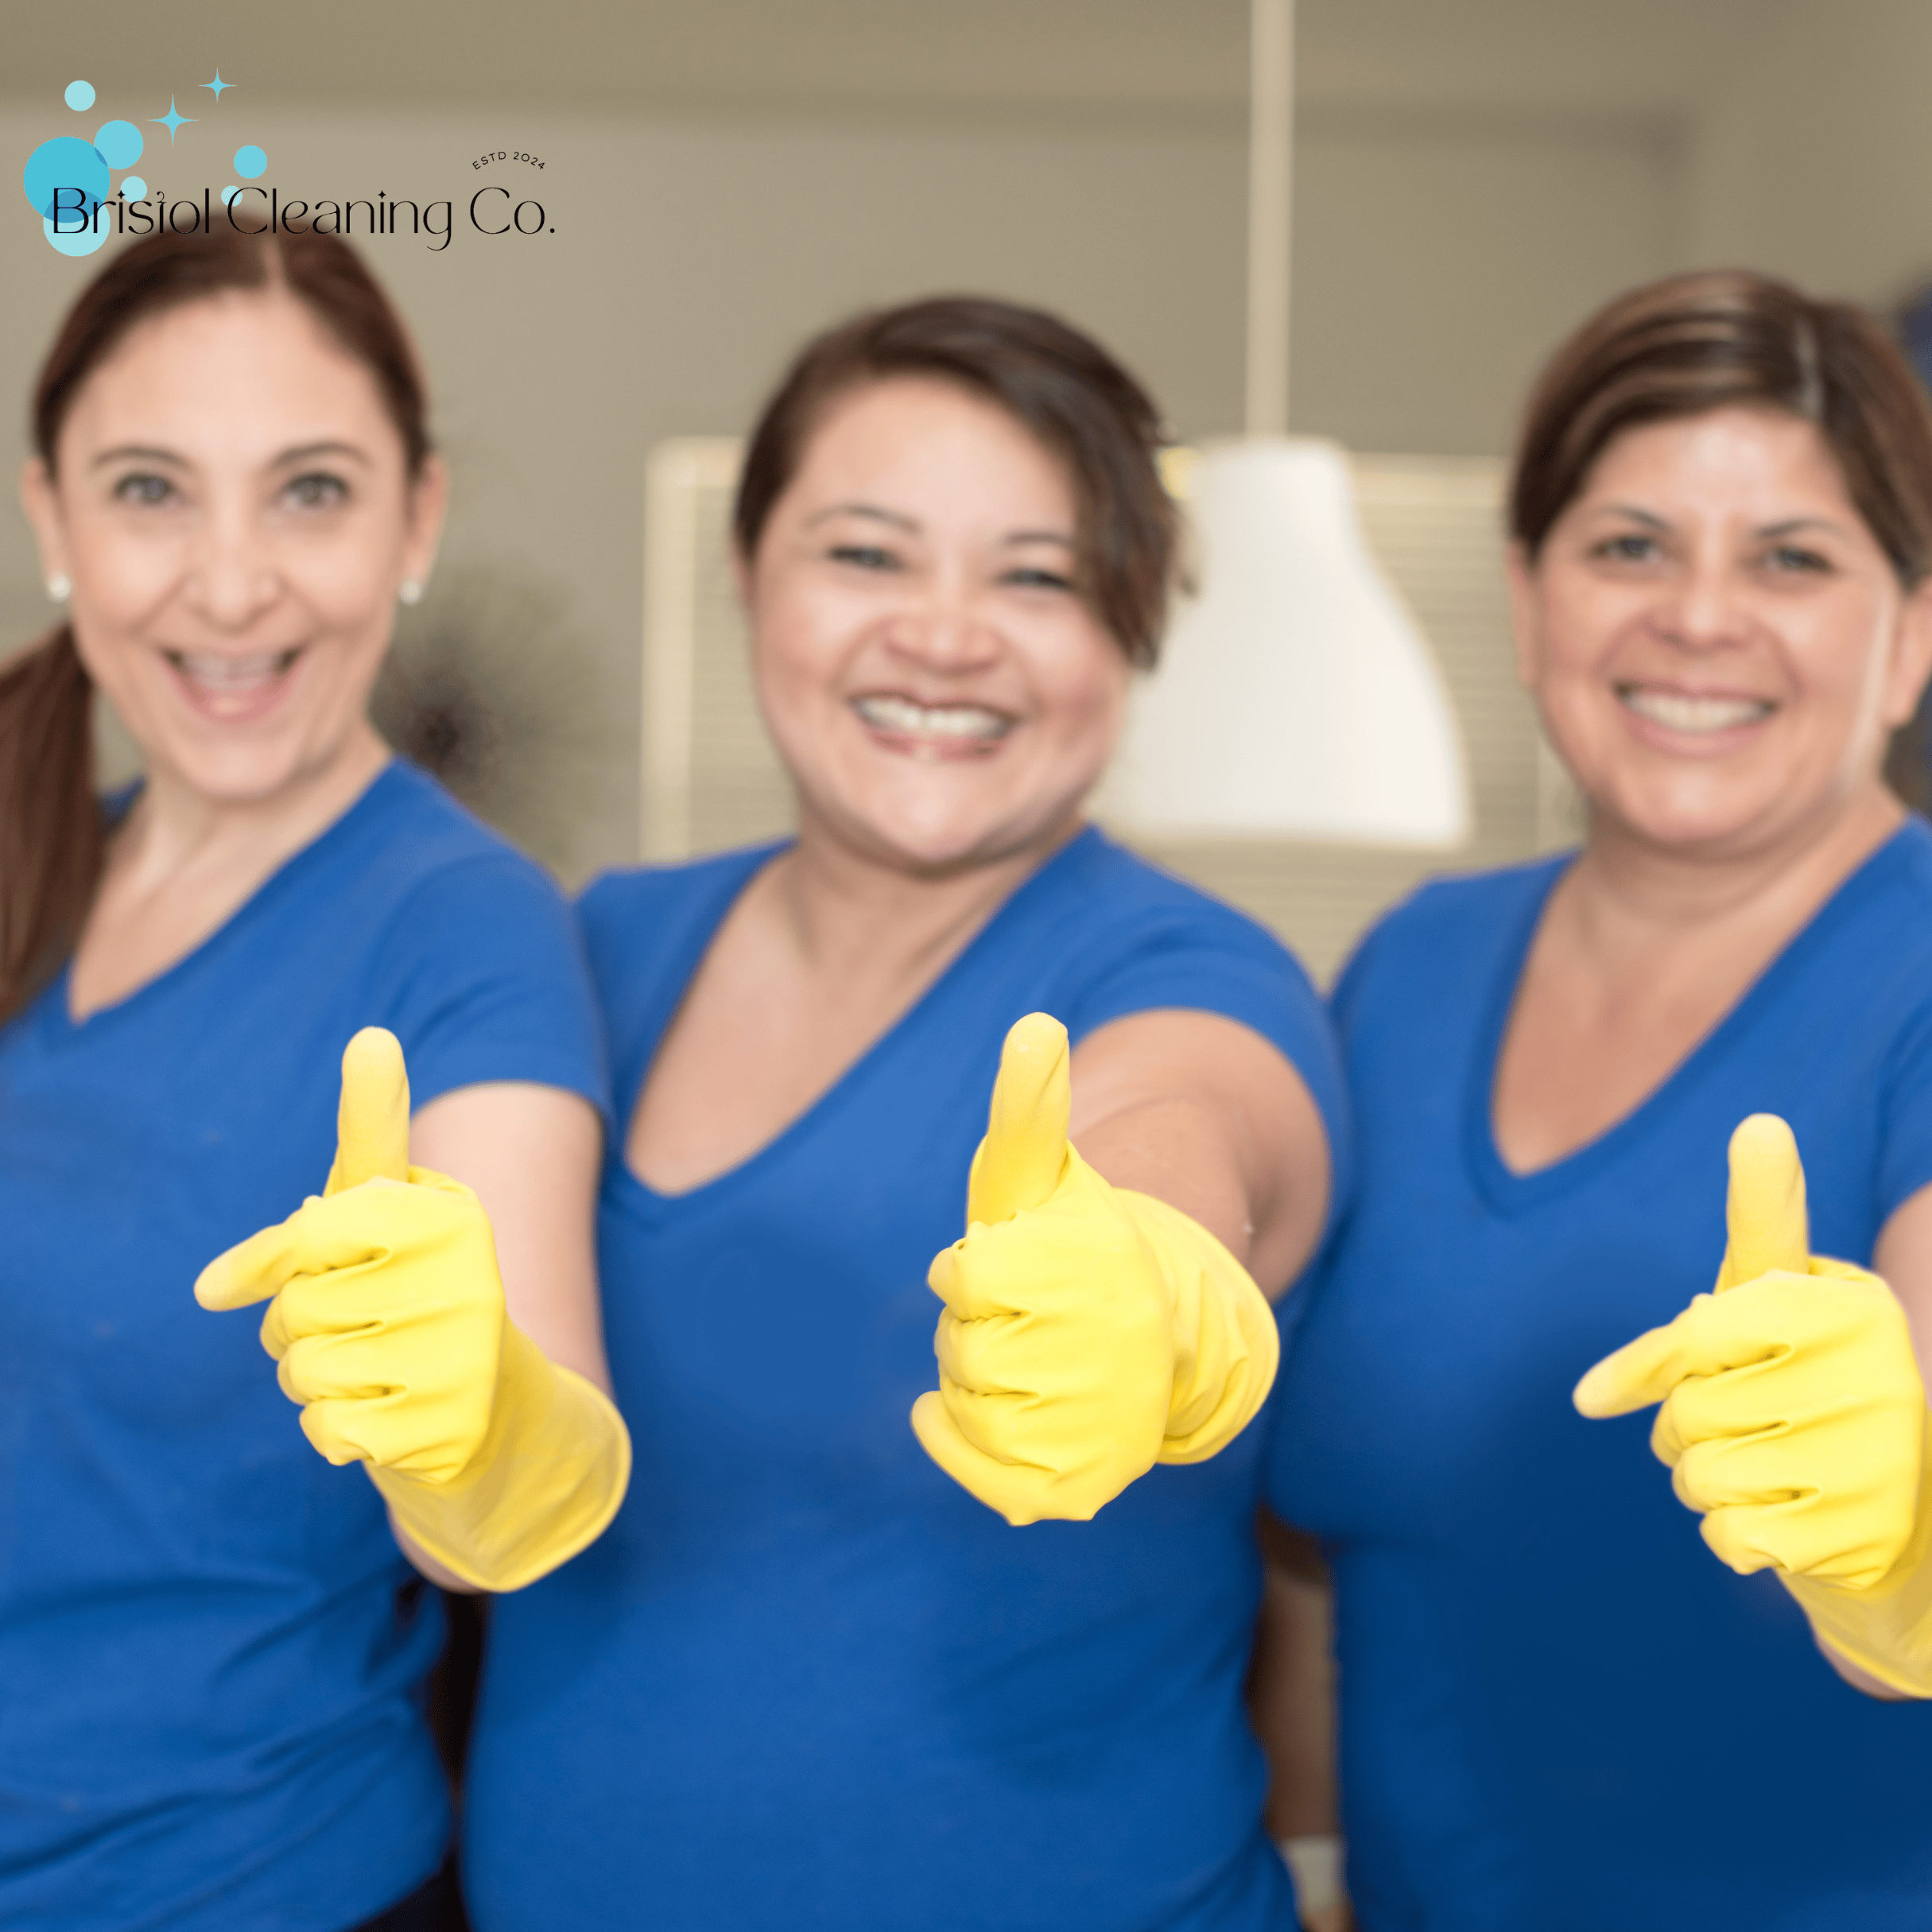 Team of smiling cleaners in Bristol Cleaning Company uniforms